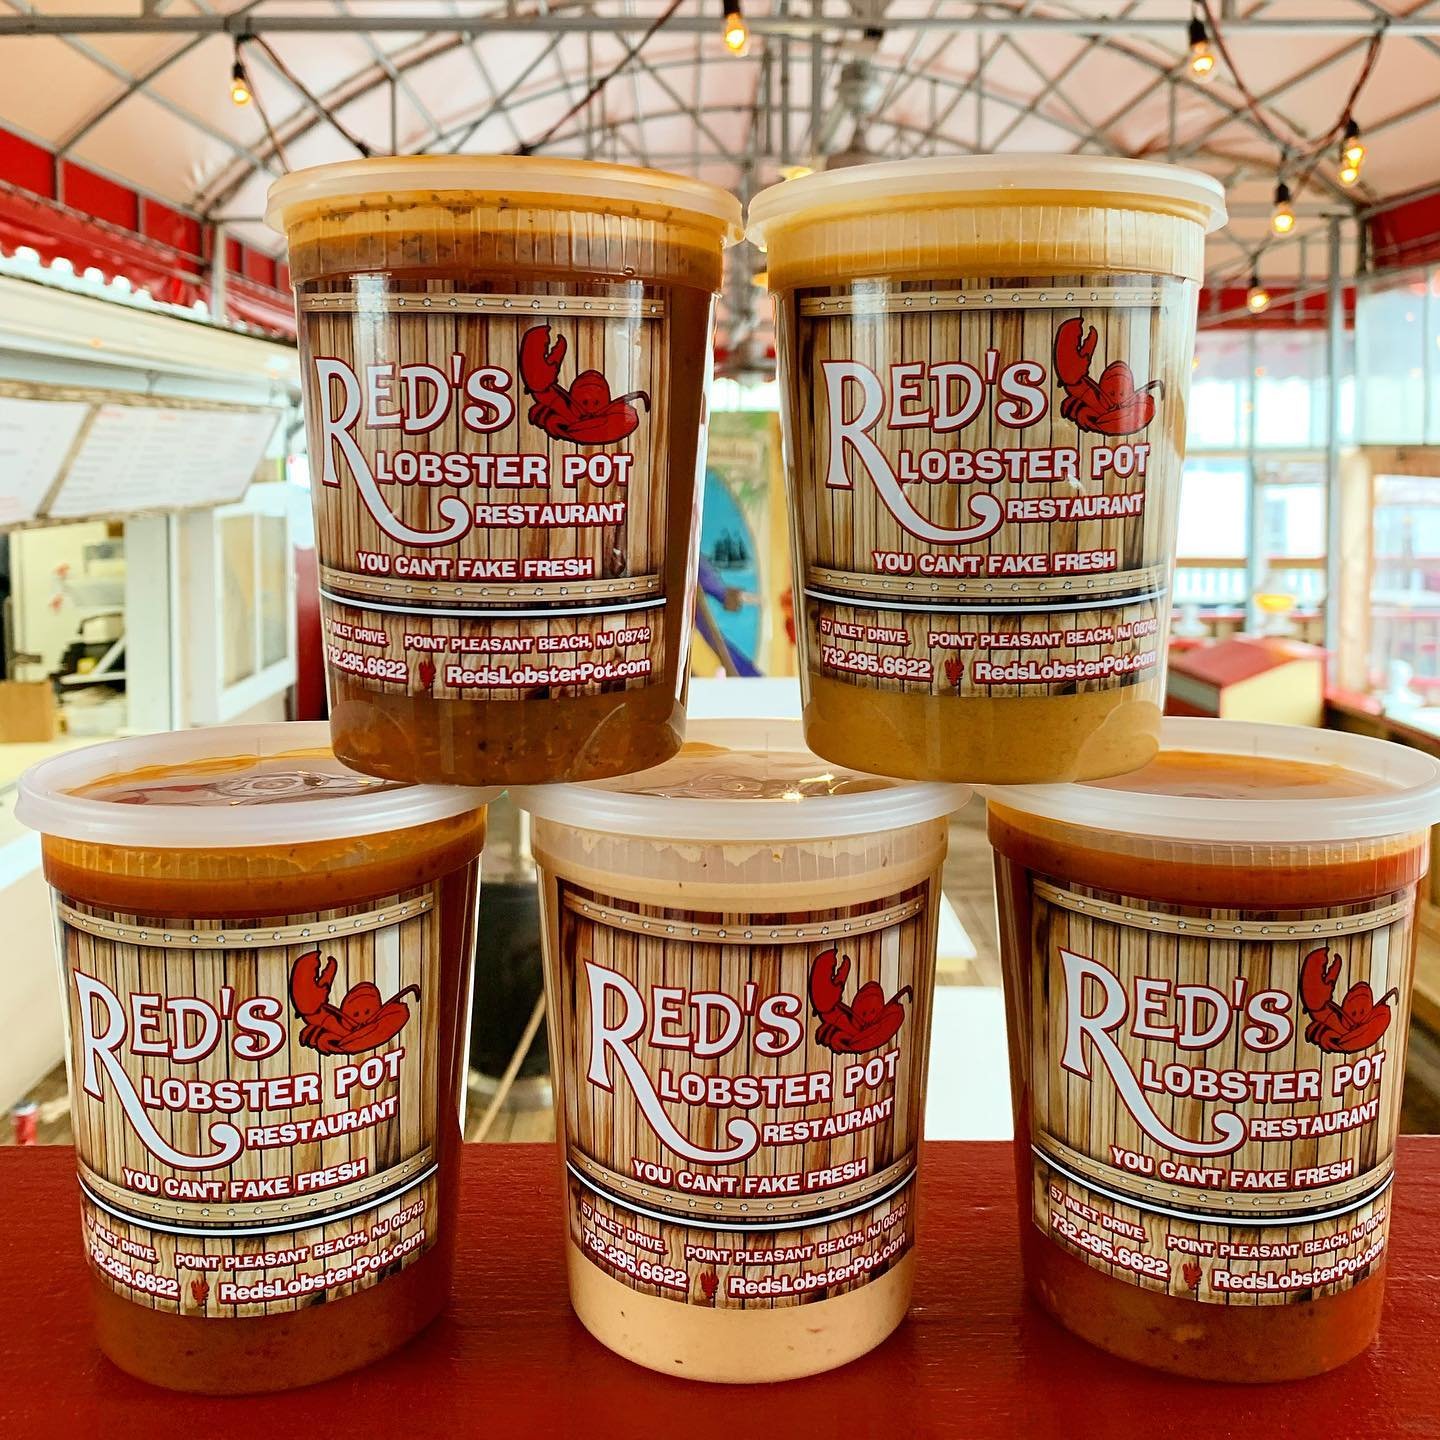 Stock up for the winter with our Soups and Sauces! Lobster Bisque, Manhattan Clam Chowder, Fra Diavolo Sauce, Marinara, and Vodka Sauce all available by the pint or quart, from now until we close for the season this Saturday September 23rd! 🦞